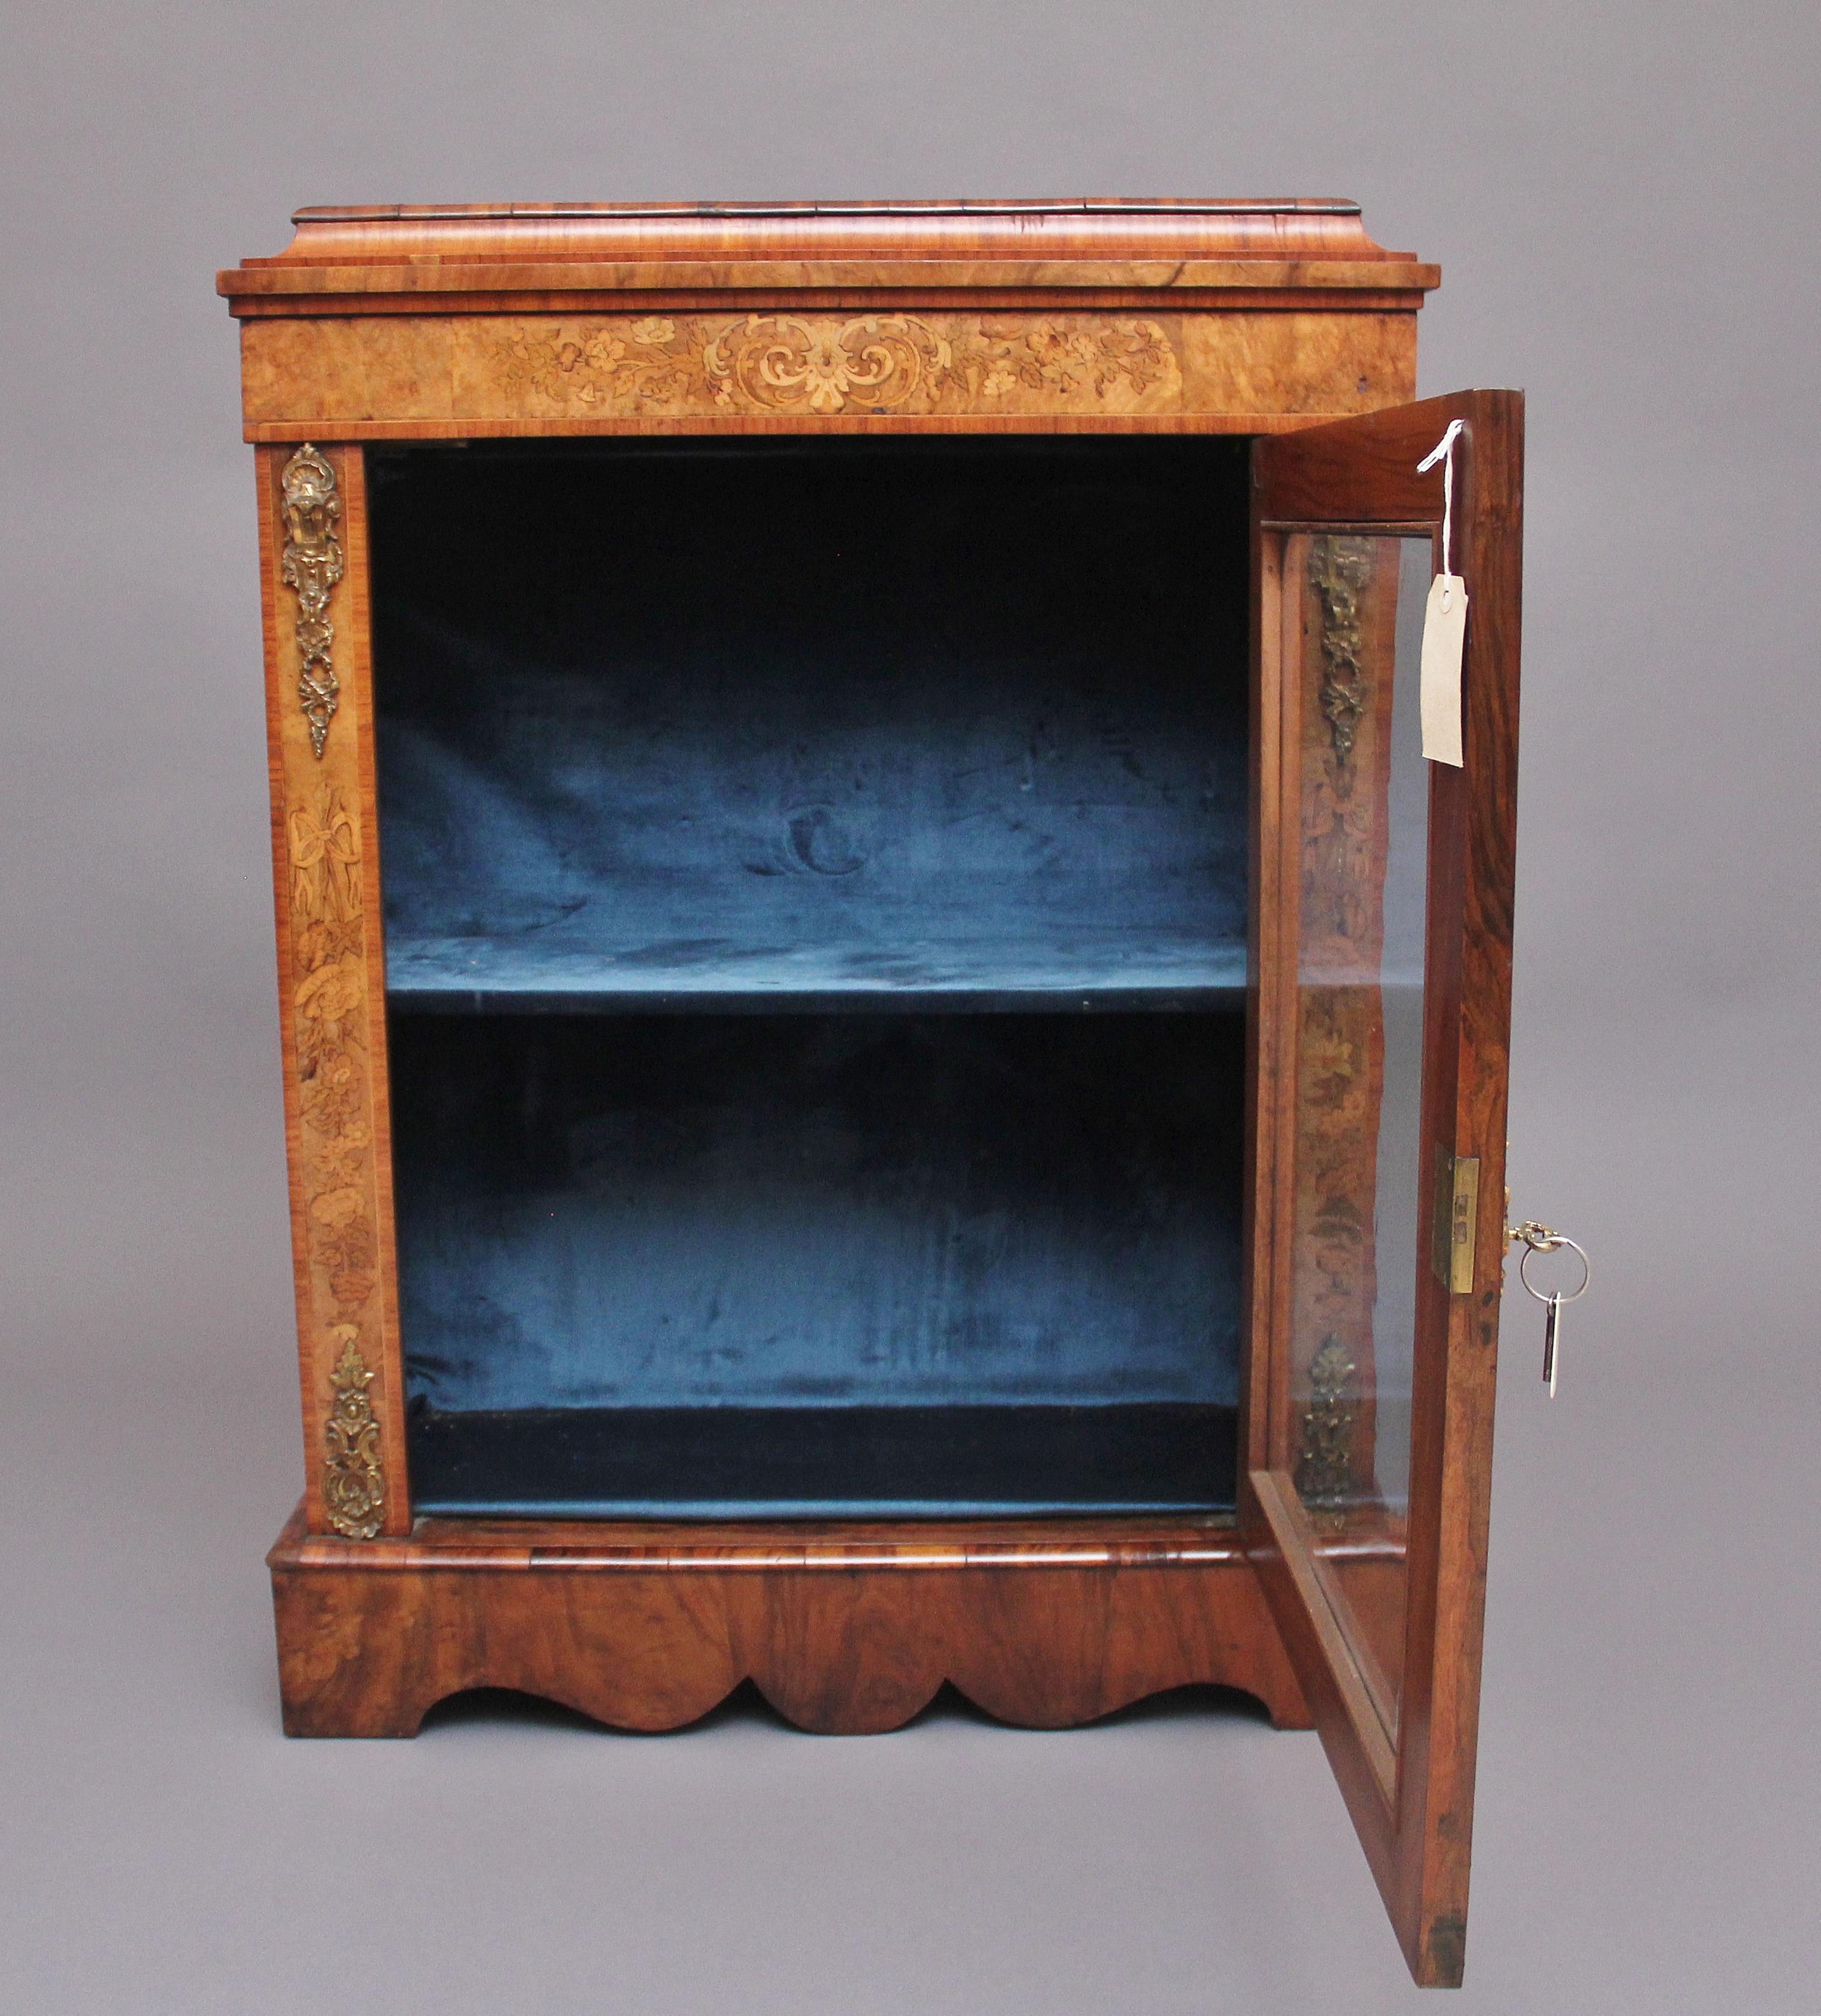 19th century walnut and marquetry pier cabinet, having a nice figured stepped and moulded edge top above a marquetry inlaid frieze with decorative floral inlay, a single door below opening to reveal a blue velvet lined interior with a fixed single